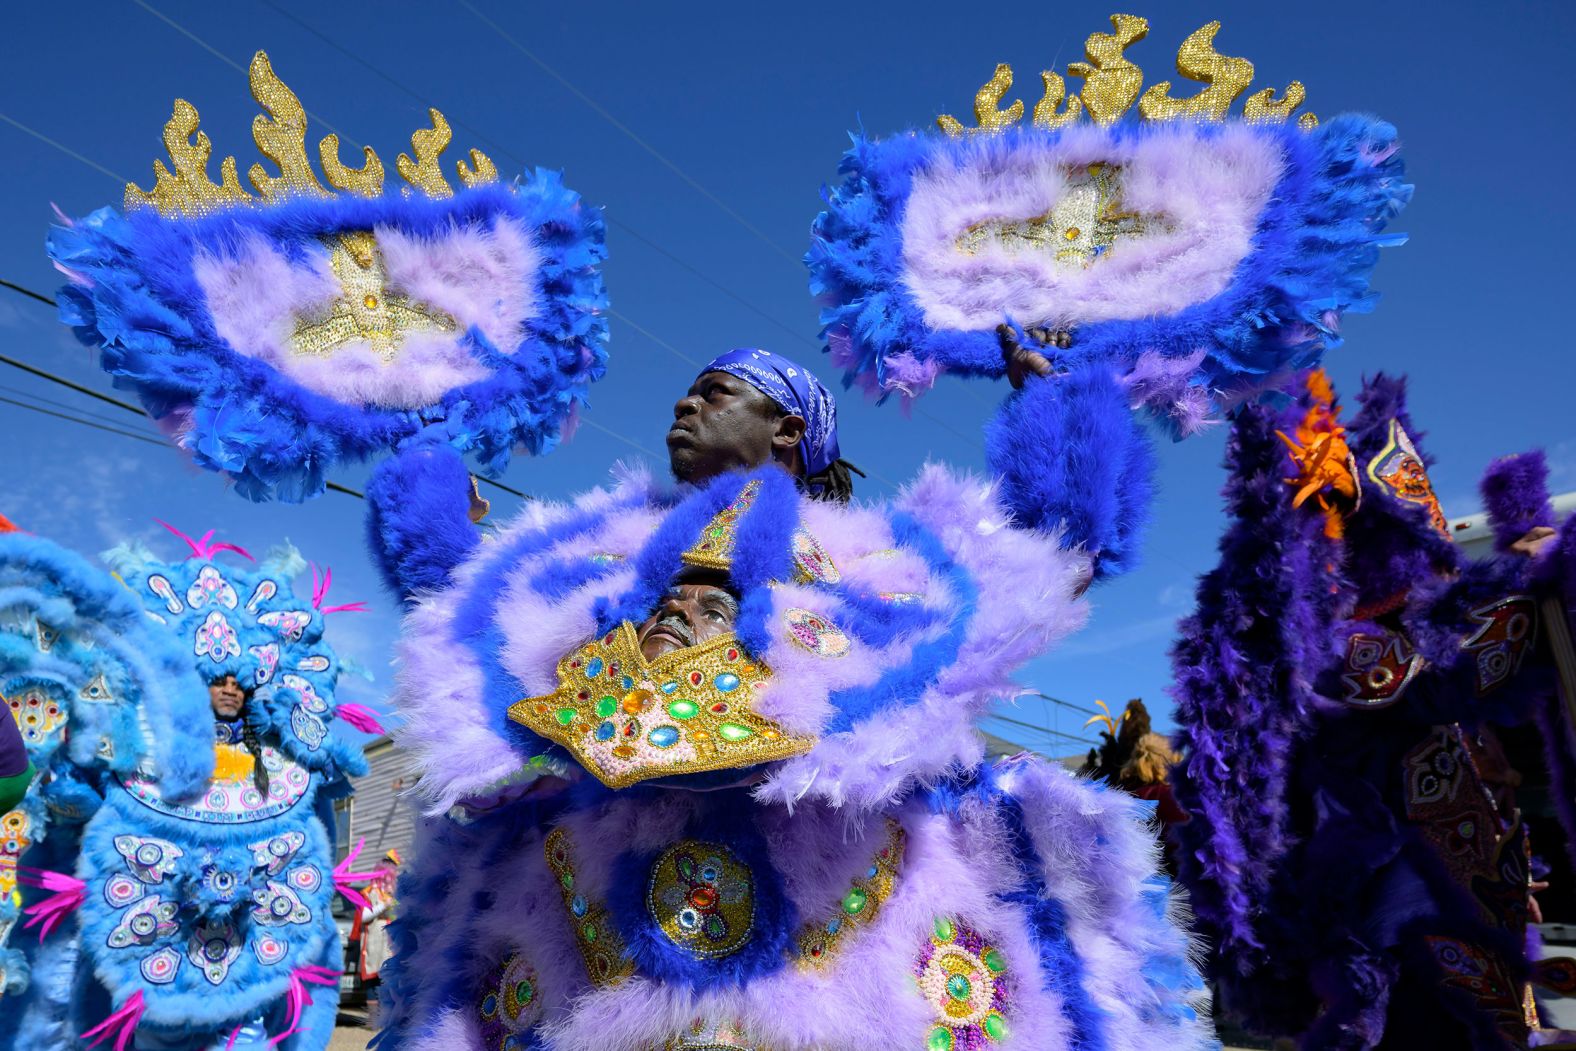 Members of the Monogram Hunters take part in a Mardi Gras parade in New Orleans on Tuesday, February 13.